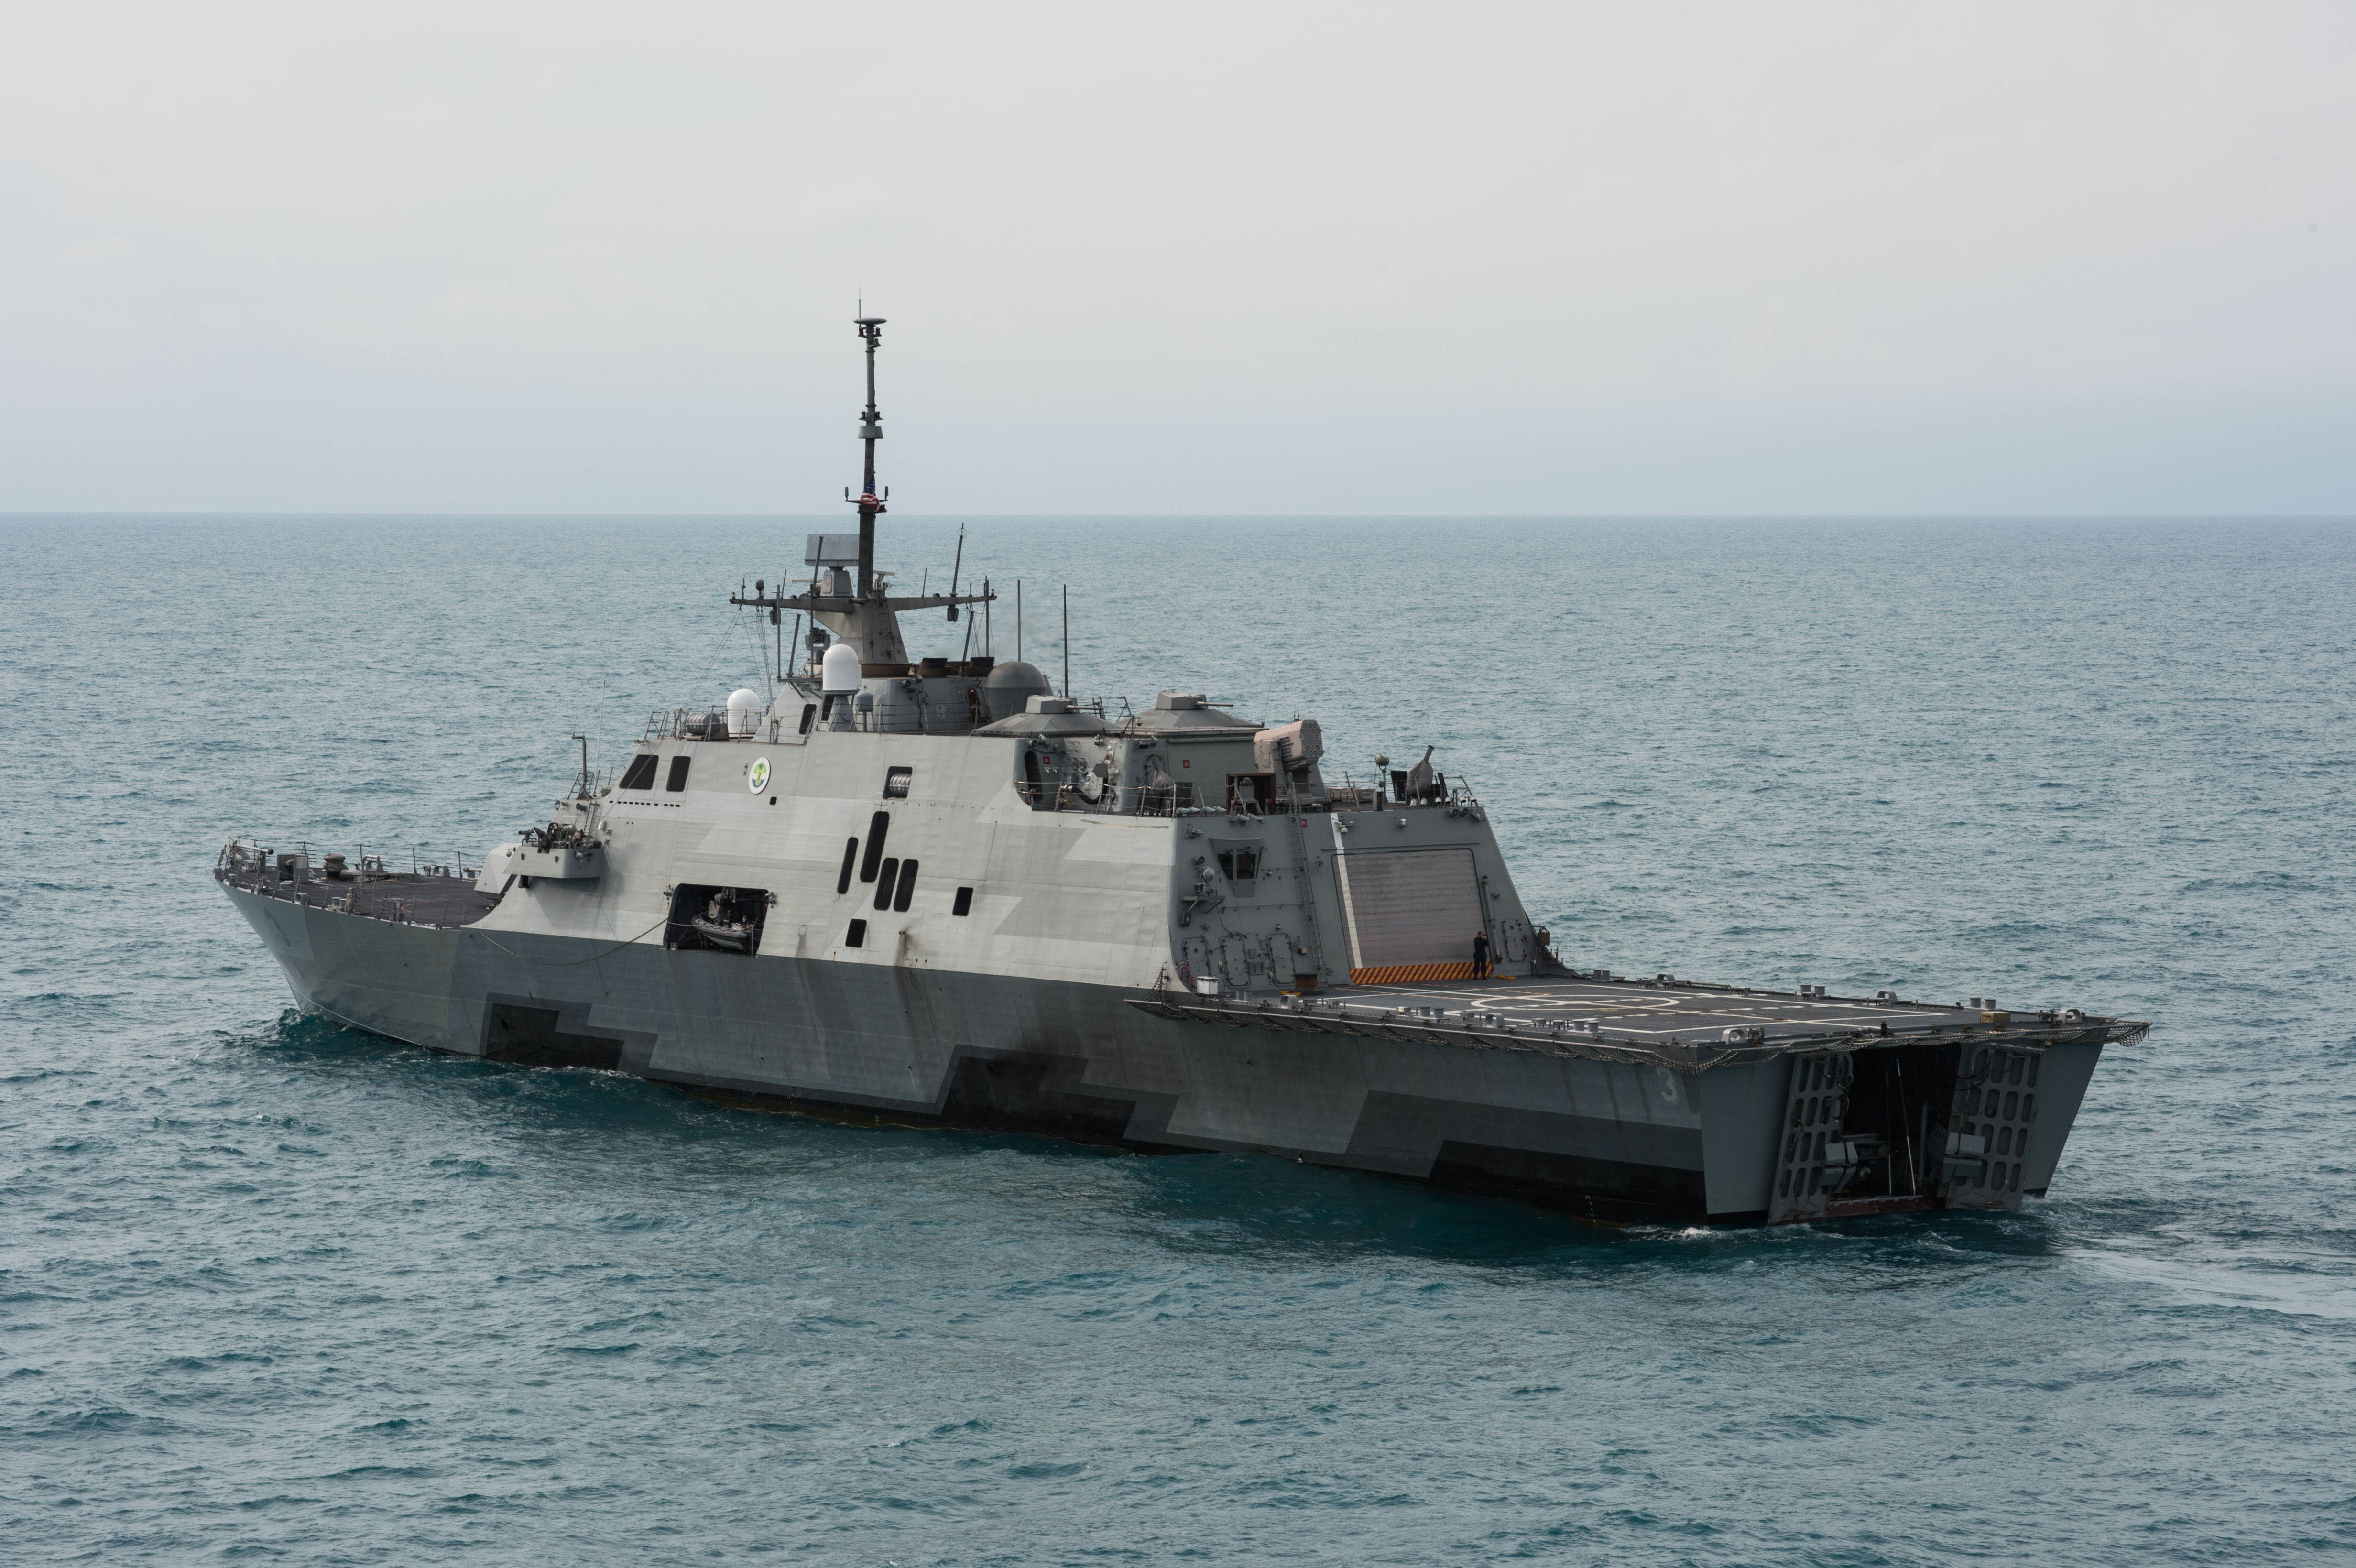 JAVA SEA (Jan. 7, 2014) The littoral combat ship USS Fort Worth (LCS 3) operates near the location where the tail of AirAsia Flight QZ8501l was discovered. Fort Worth is currently supporting Indonesian-led efforts to locate the downed aircraft. U.S. Navy photo by Mass Communication Specialist 2nd Class Antonio P. Turretto Ramos.